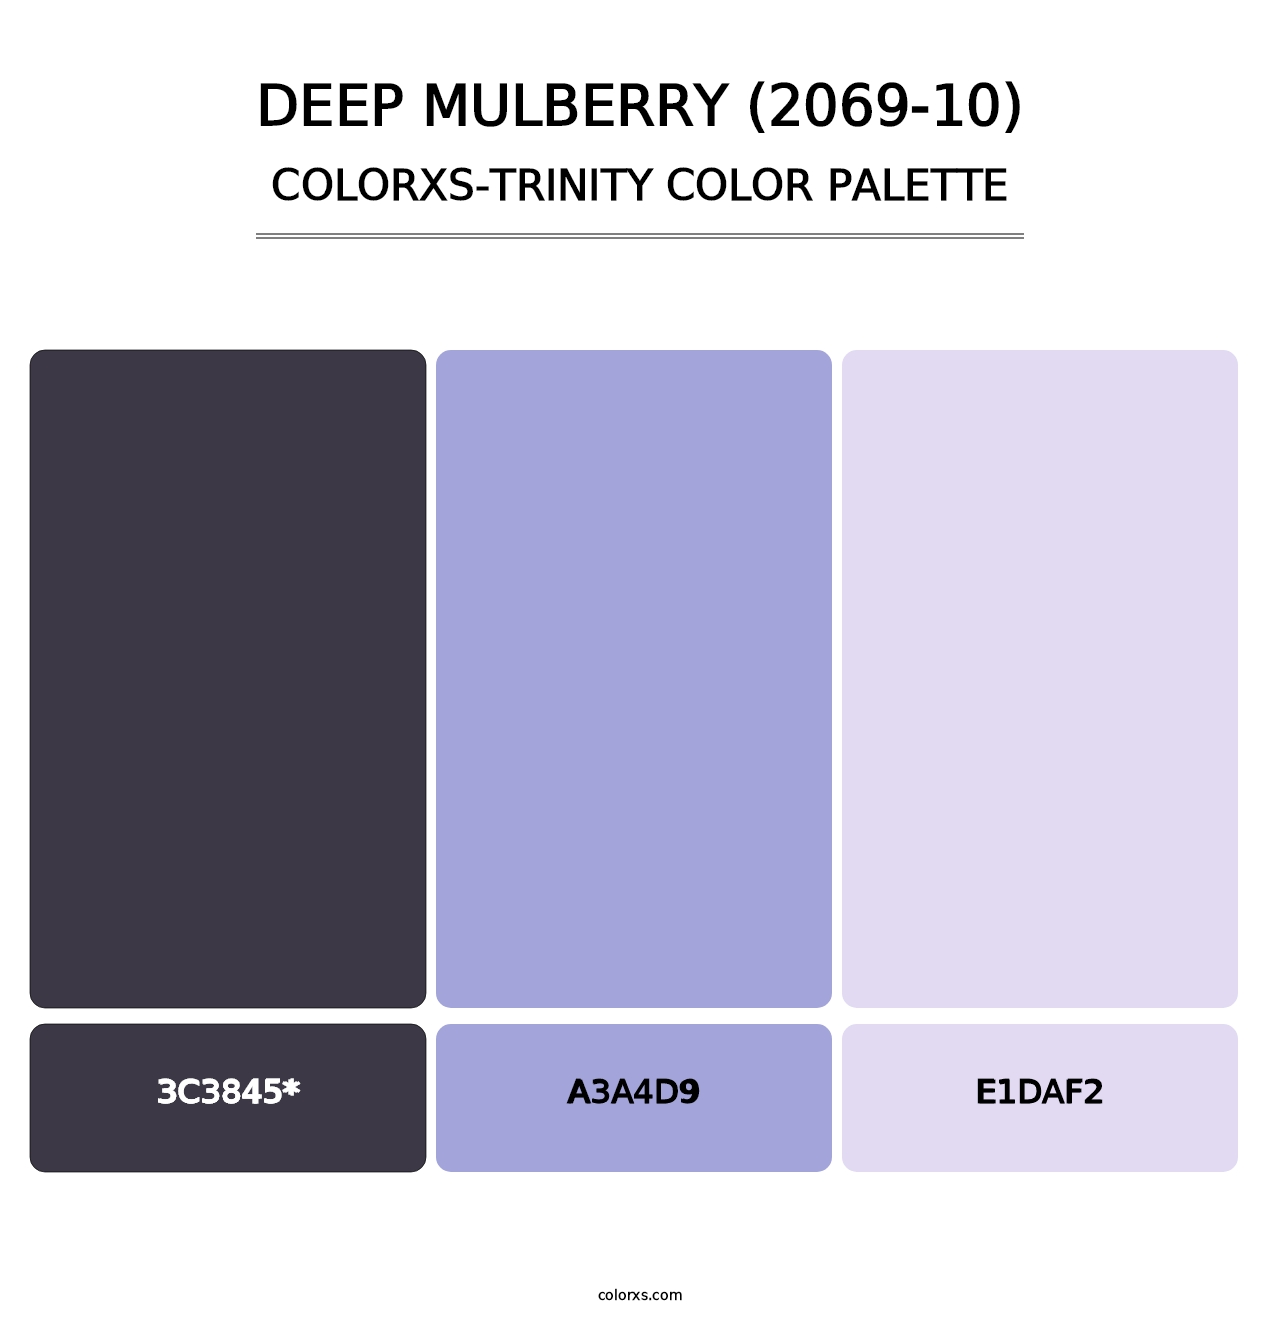 Deep Mulberry (2069-10) - Colorxs Trinity Palette